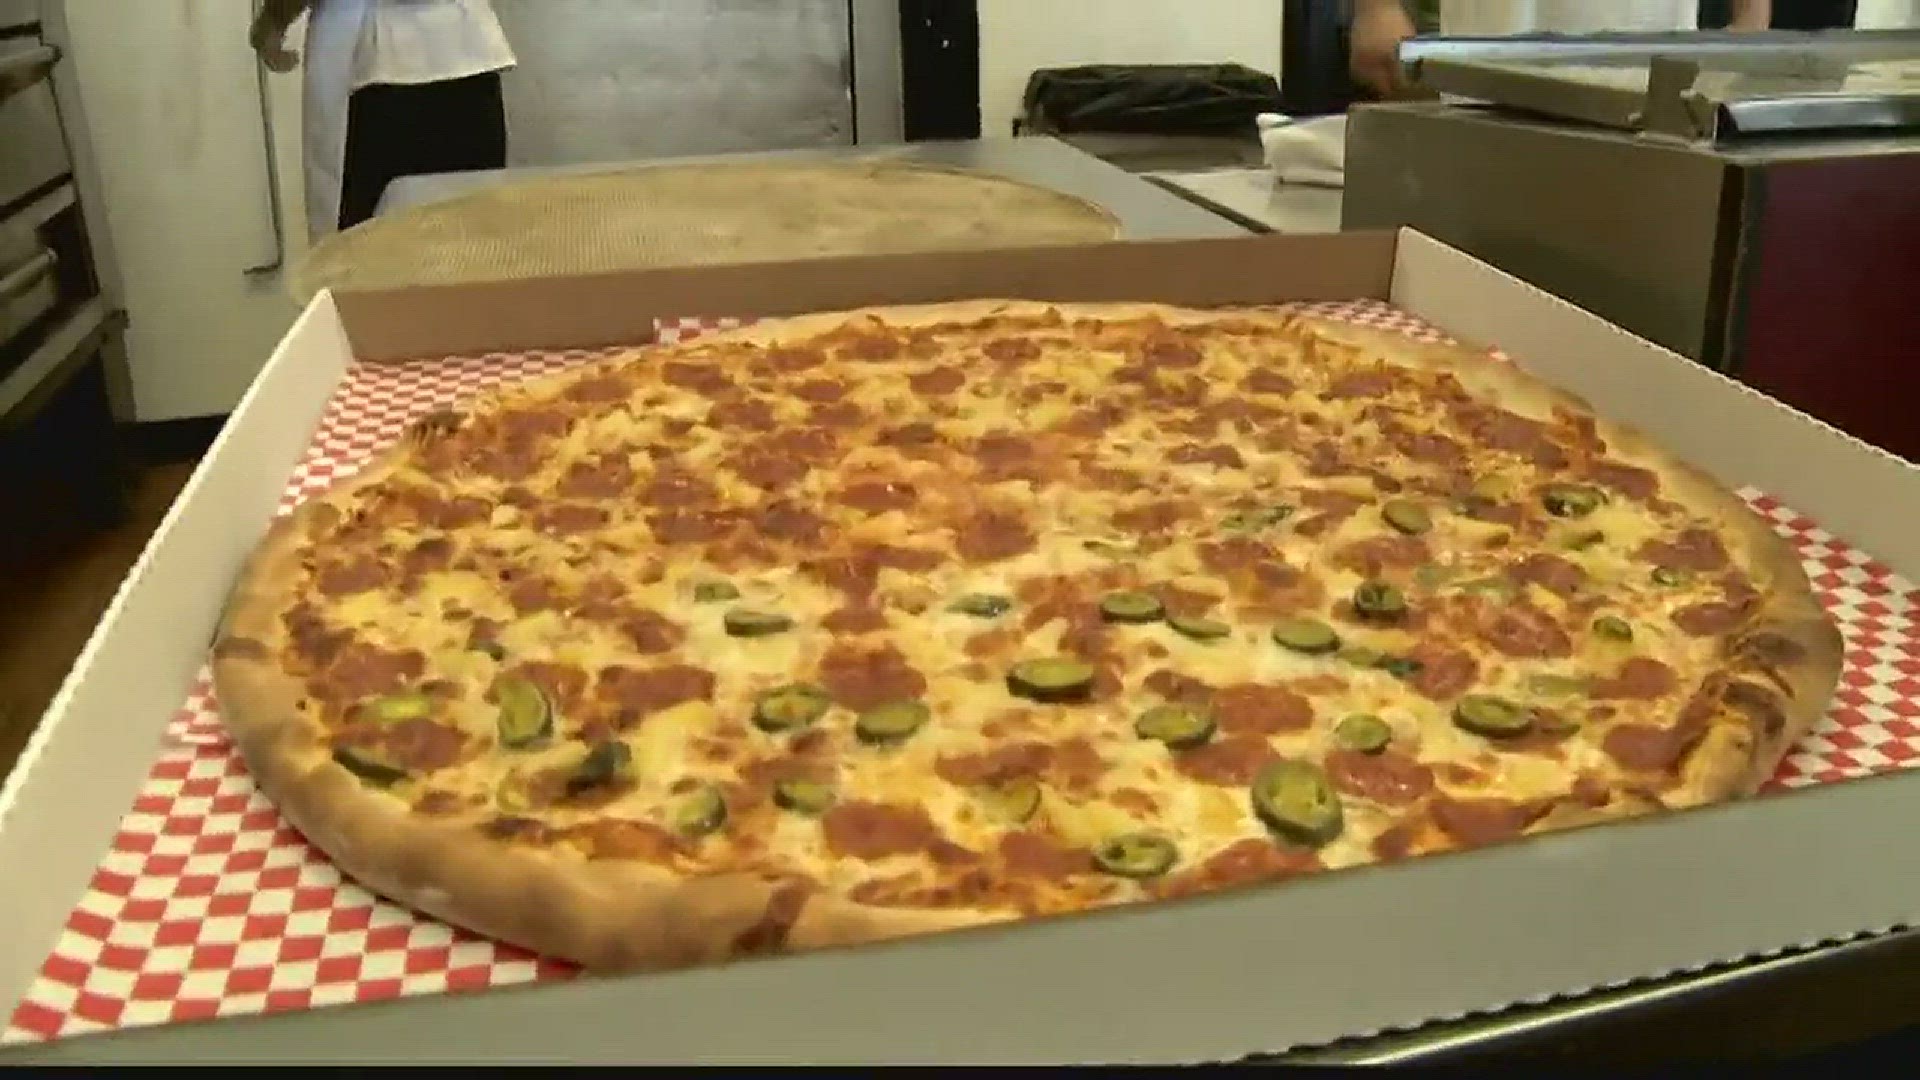 The Lexington pizza place even has a 28-inch pizza on their menu.